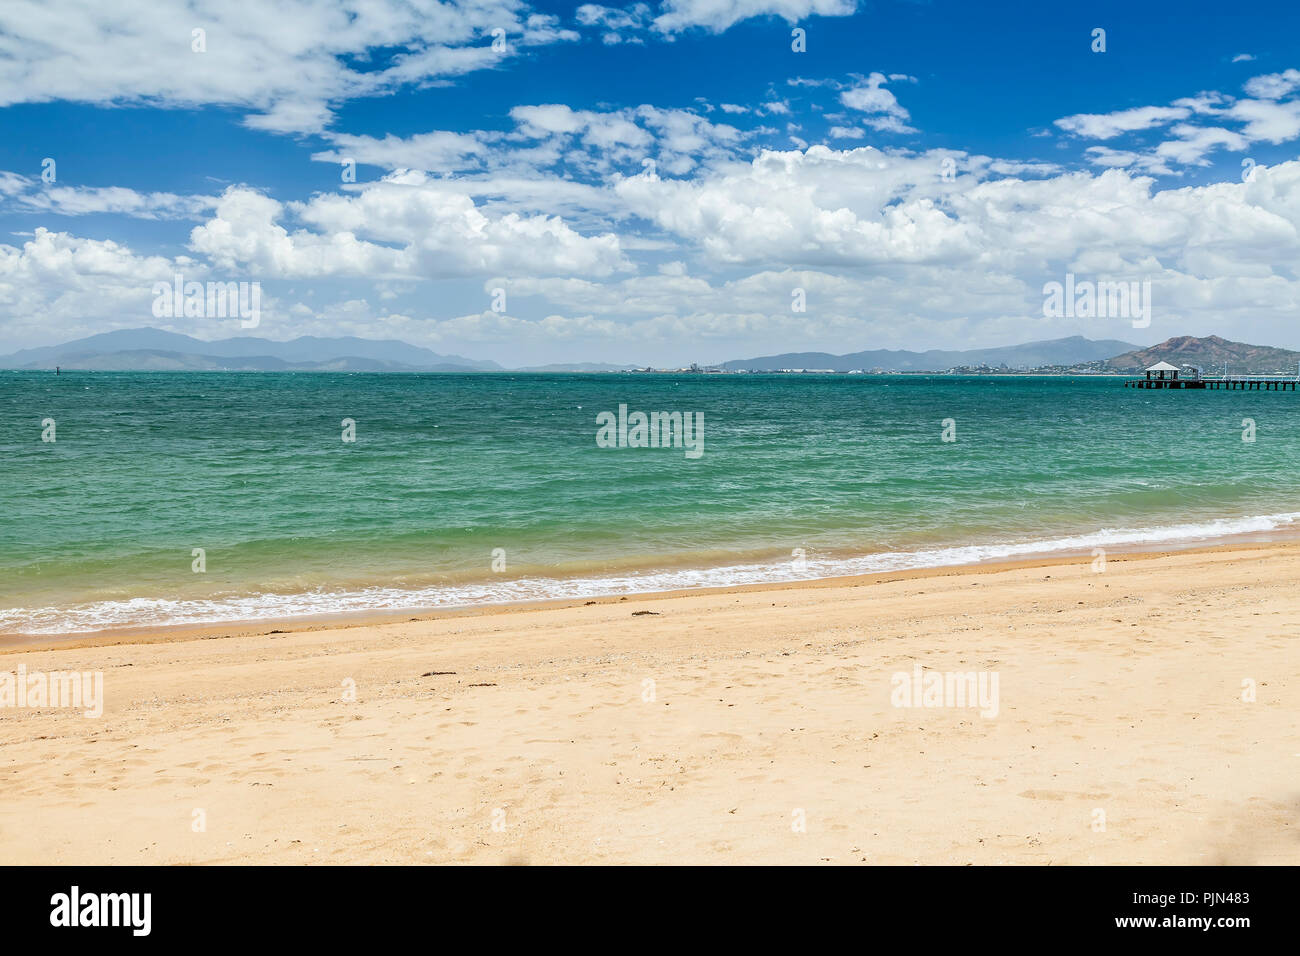 The nice beach of Magnetic Iceland in Australia, Der schoene Strand von Magnetic Island in Australien Stock Photo